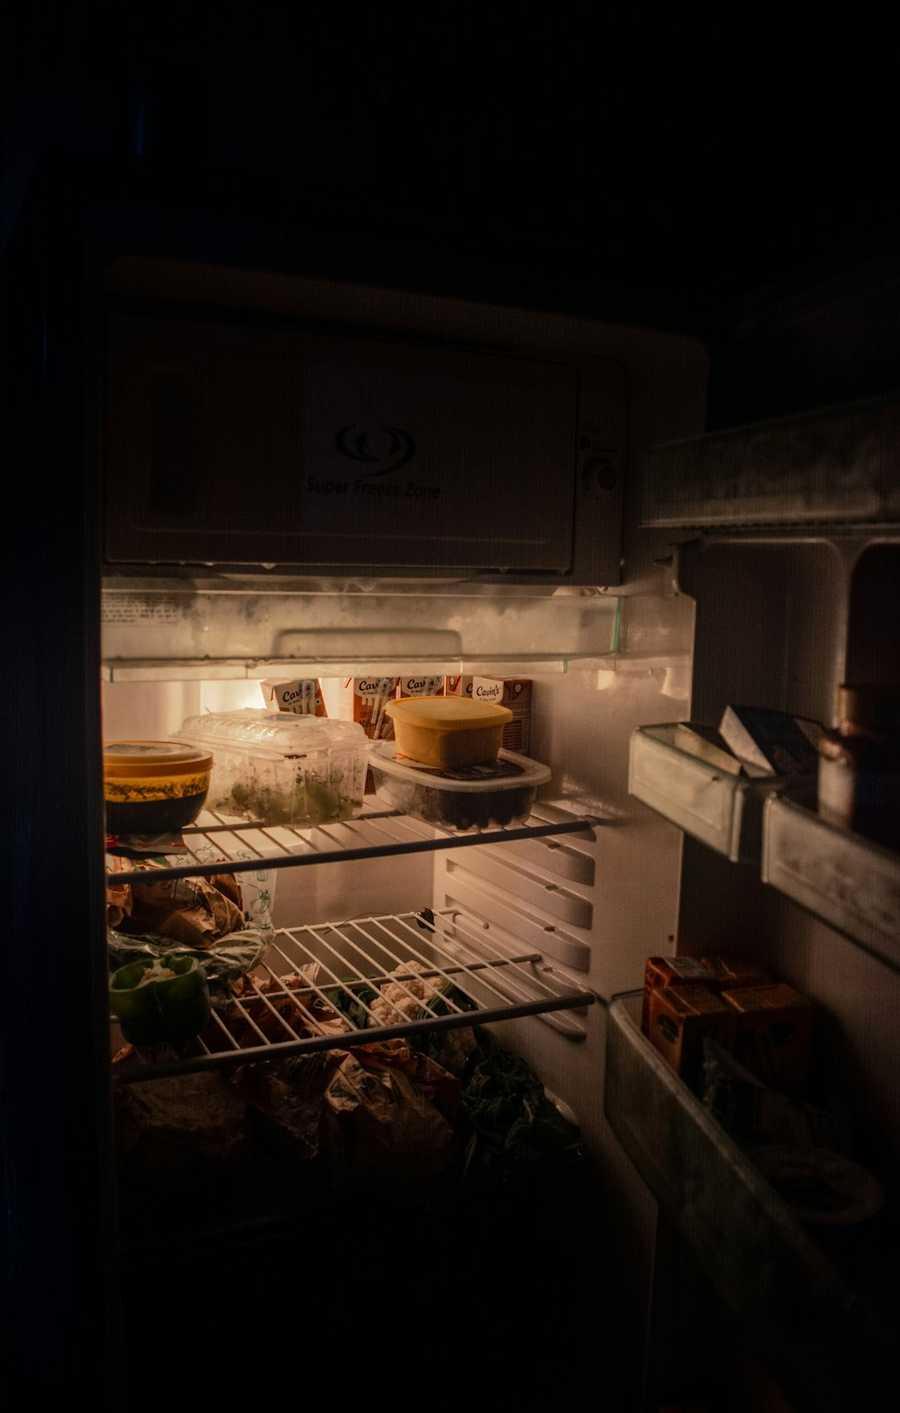 Mistake #5: Letting Food Cool Before Putting In Fridge